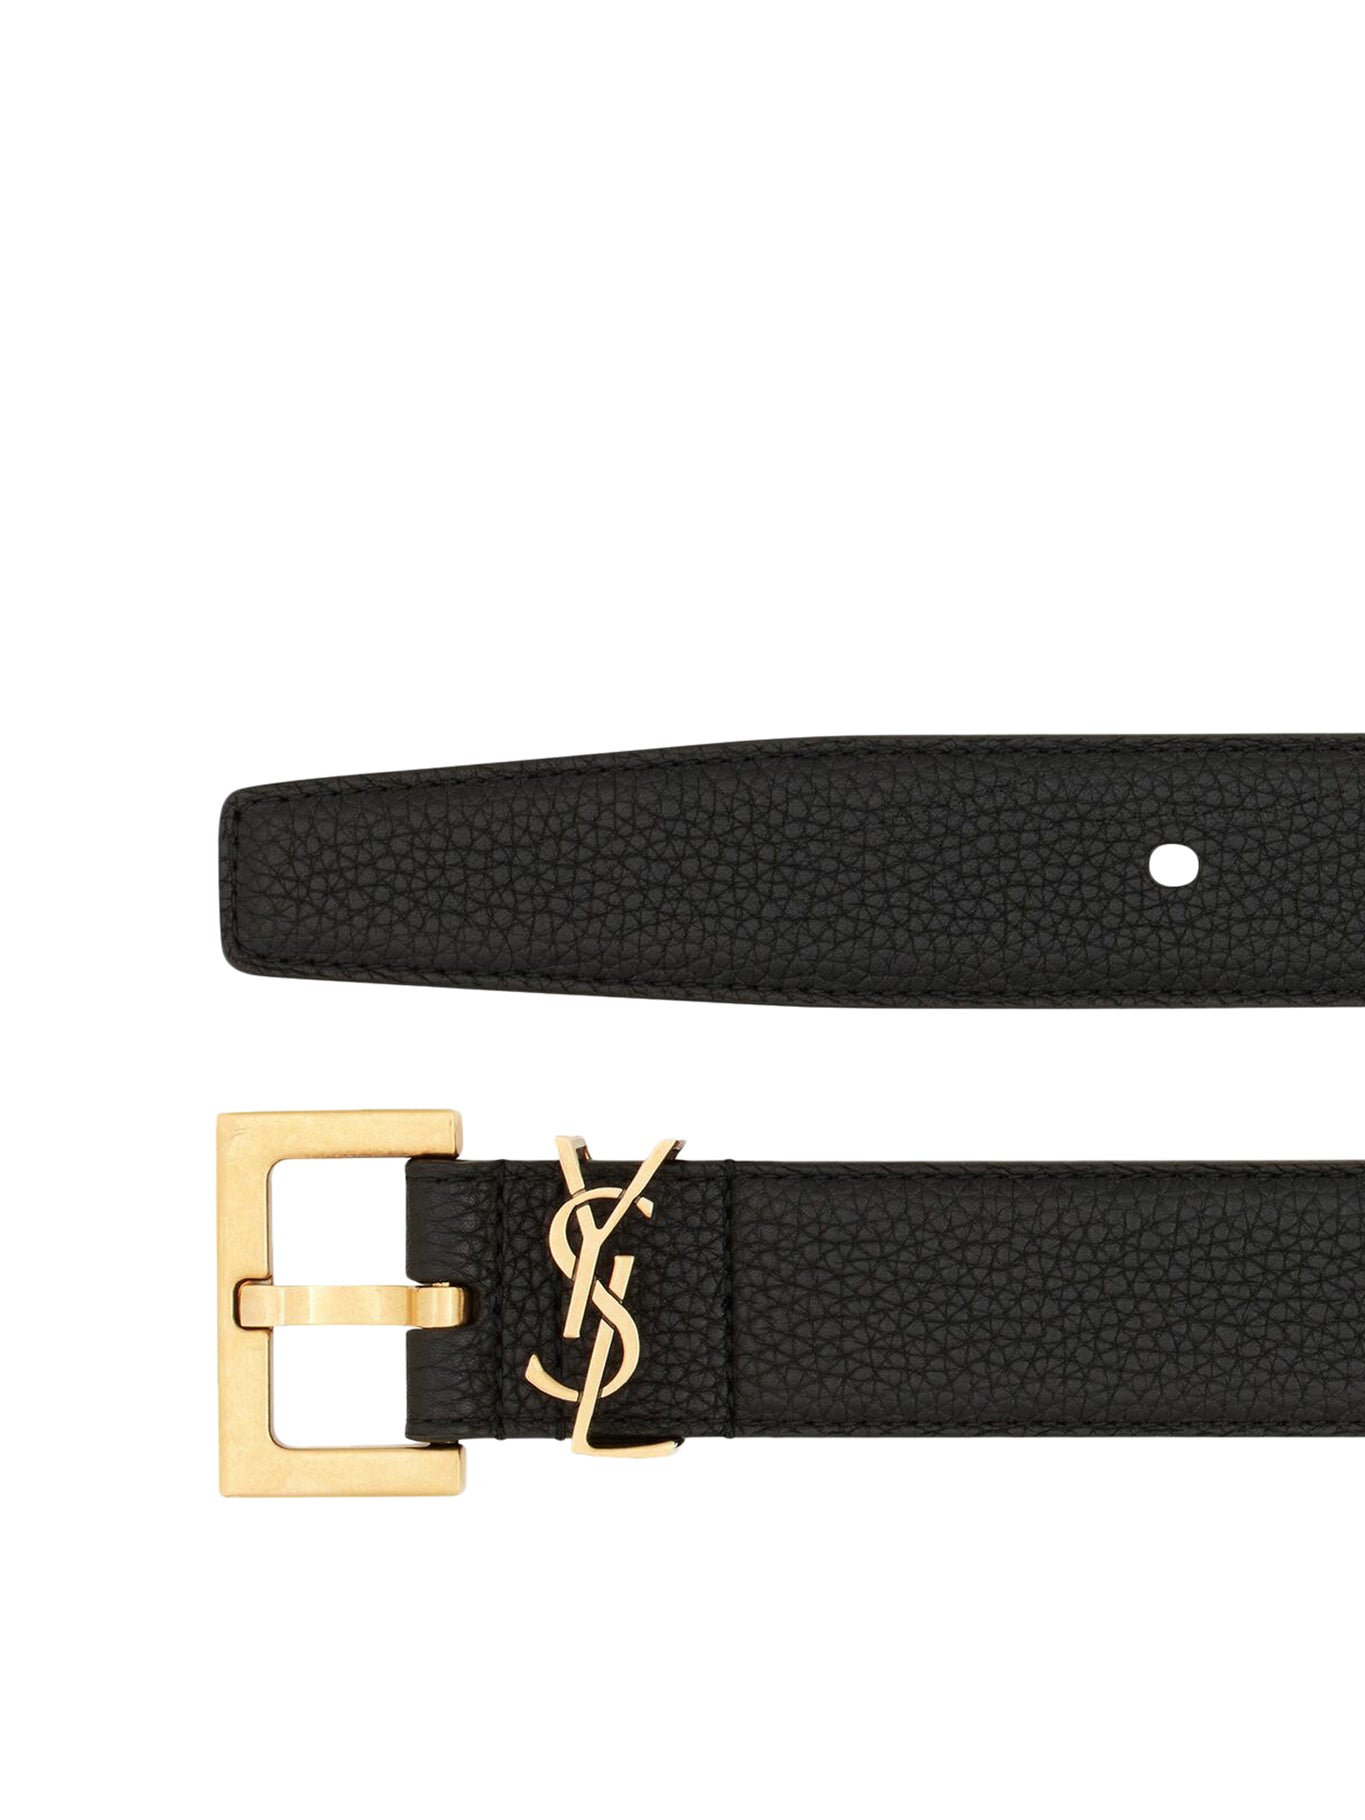 CASSANDRE HAMMERED LEATHER BELT WITH SQUARE BUCKLE